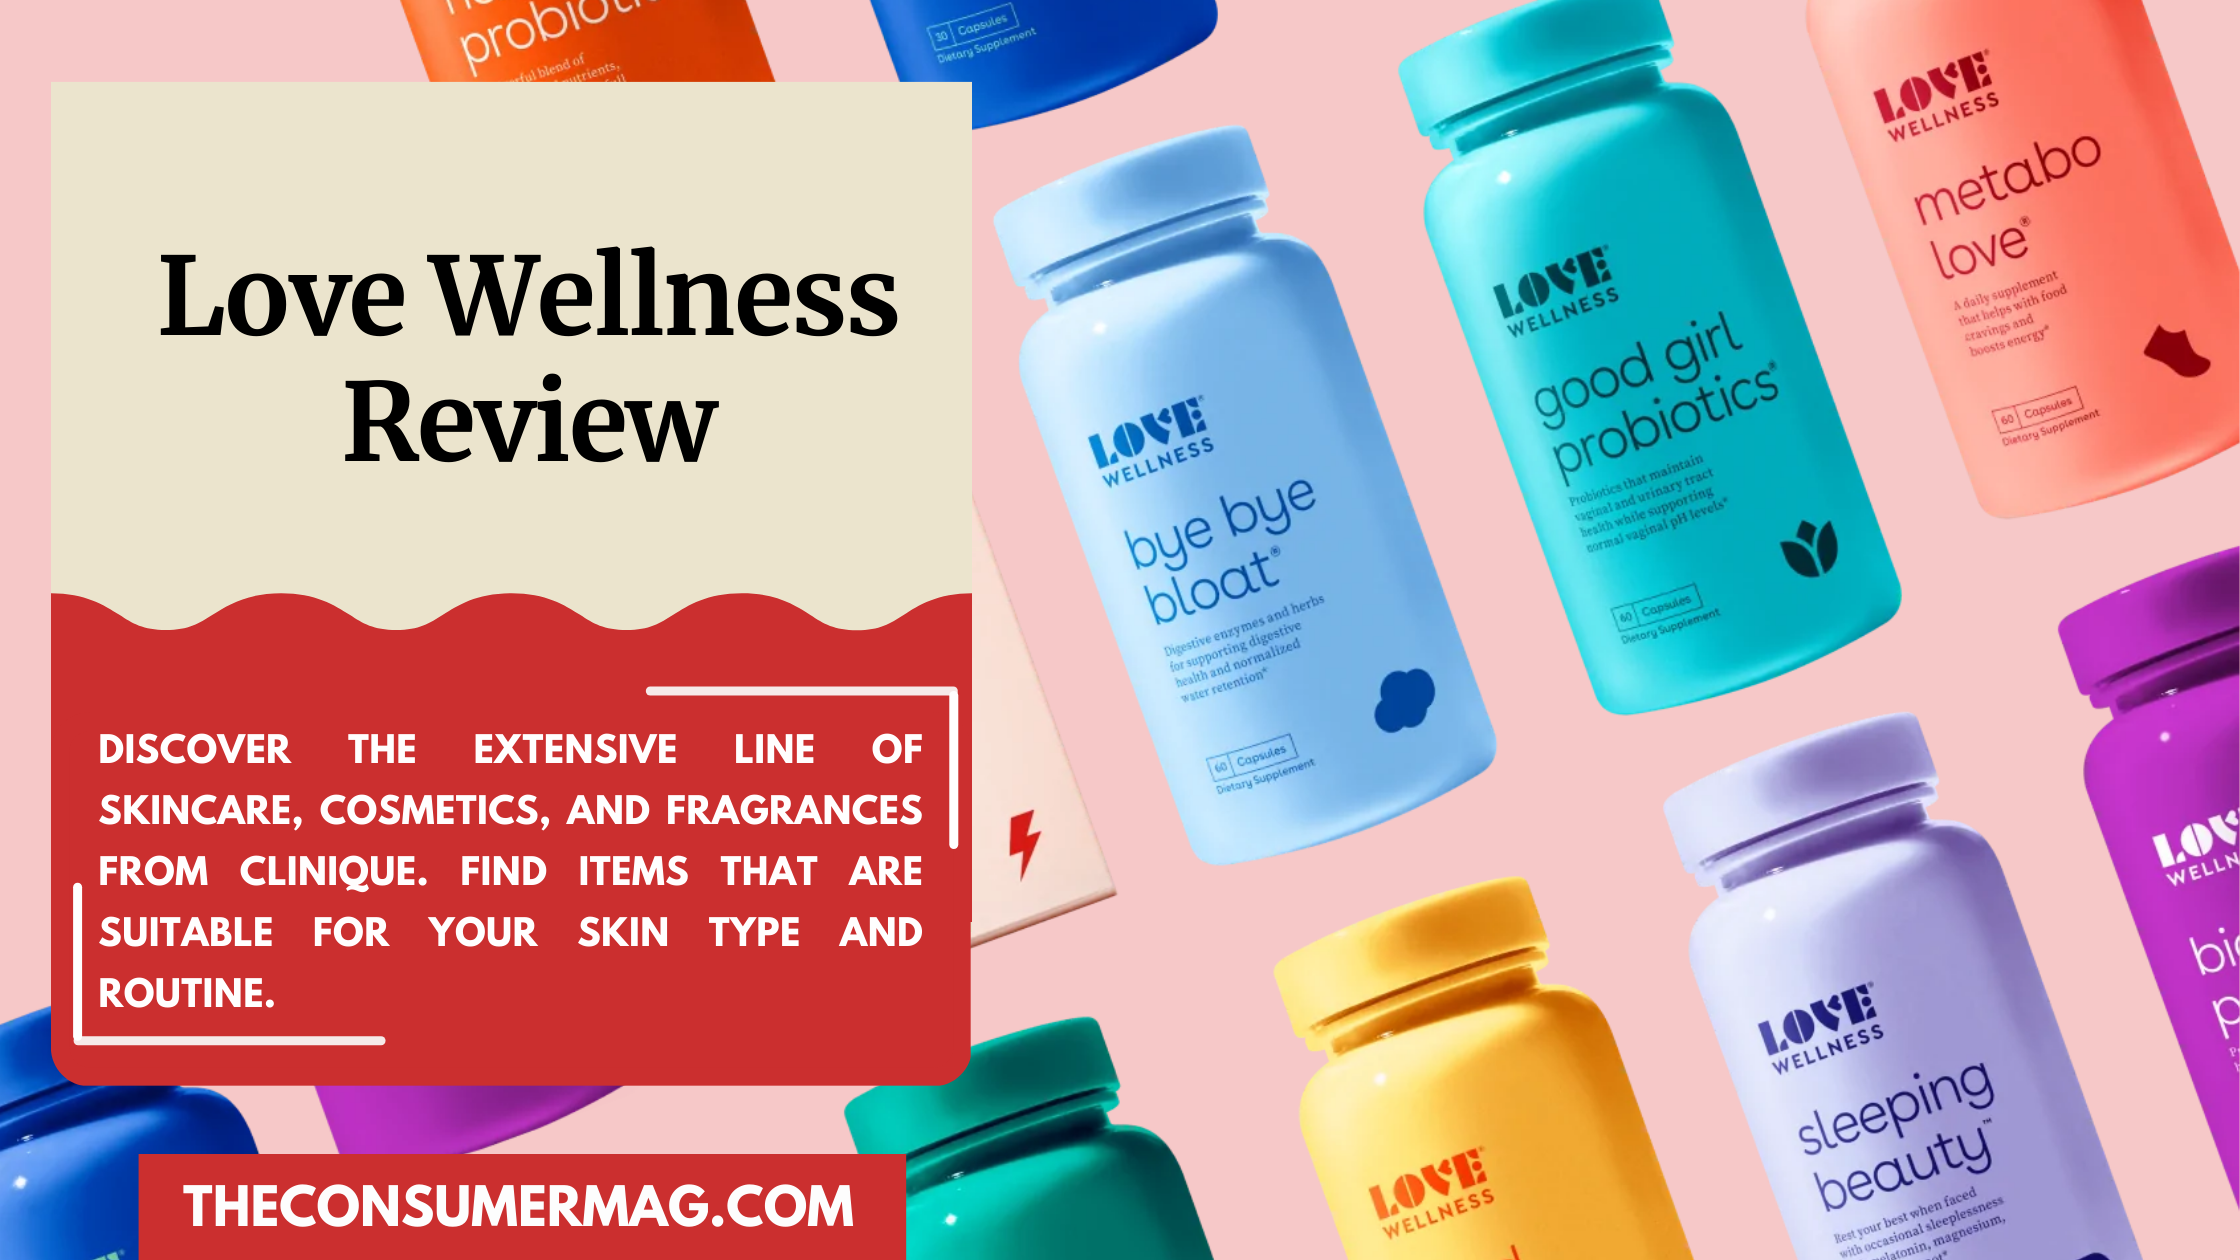 Love wellness featured image